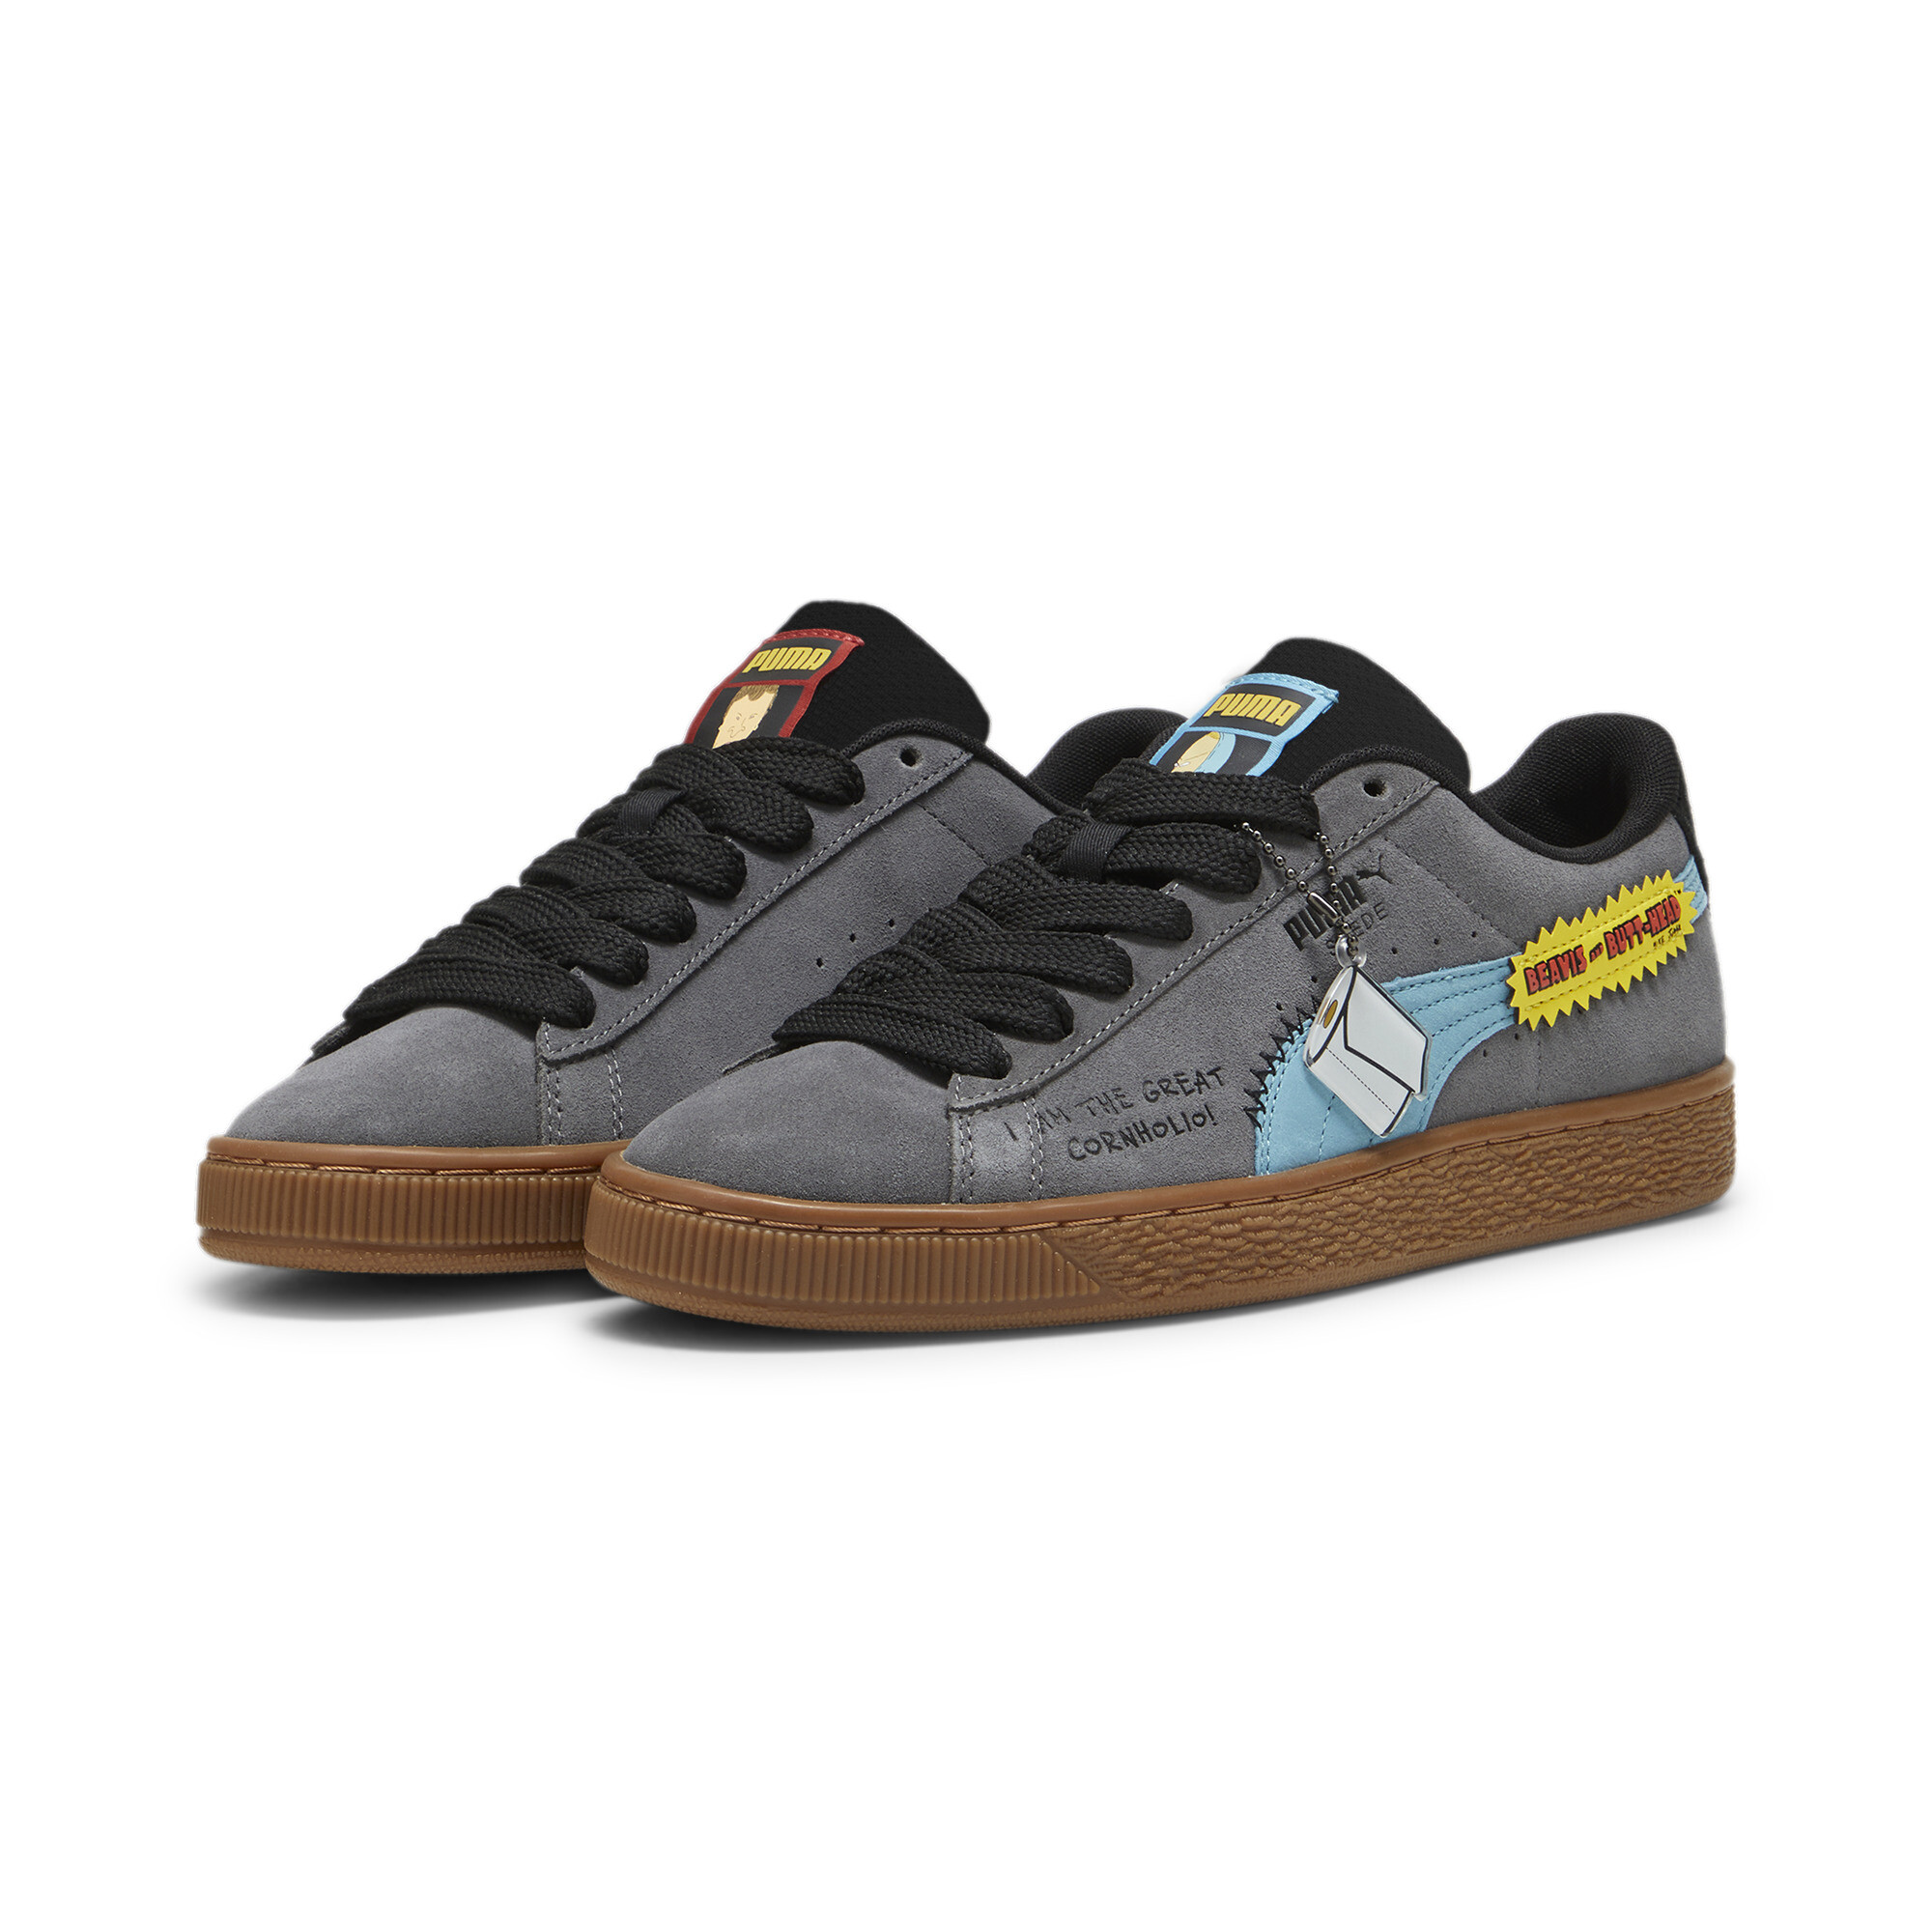 Men's Puma X BEAVIS AND BUTTHEAD Suede Sneakers, Gray, Size 42.5, Shoes